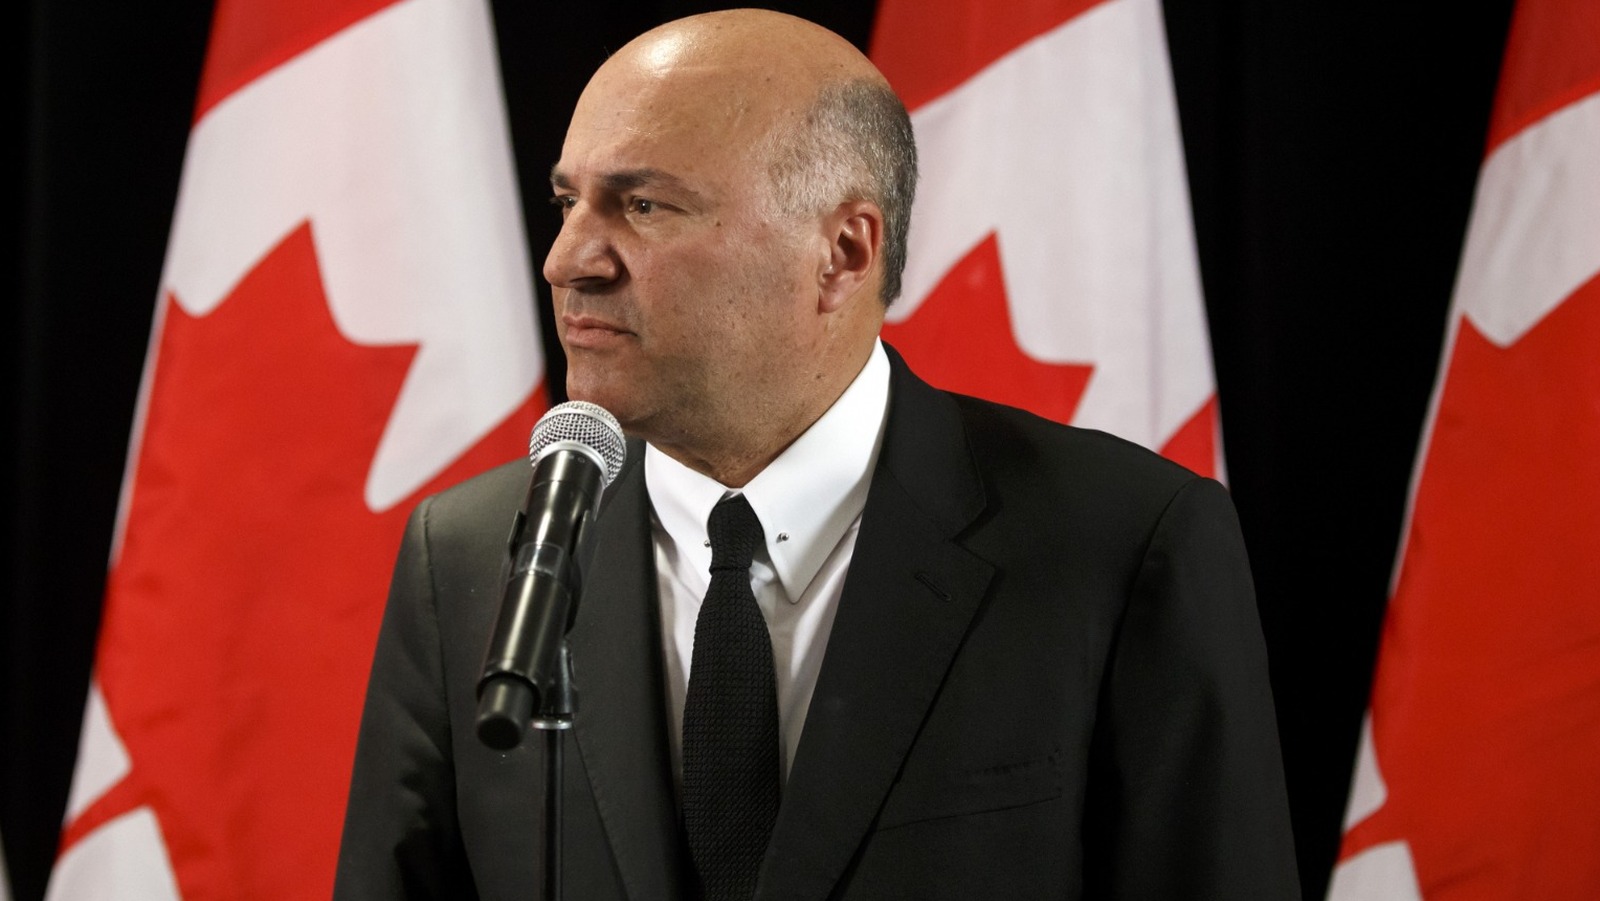 Why Shark Tank's Kevin O'Leary Was Described As 'Canadian Donald Trump'